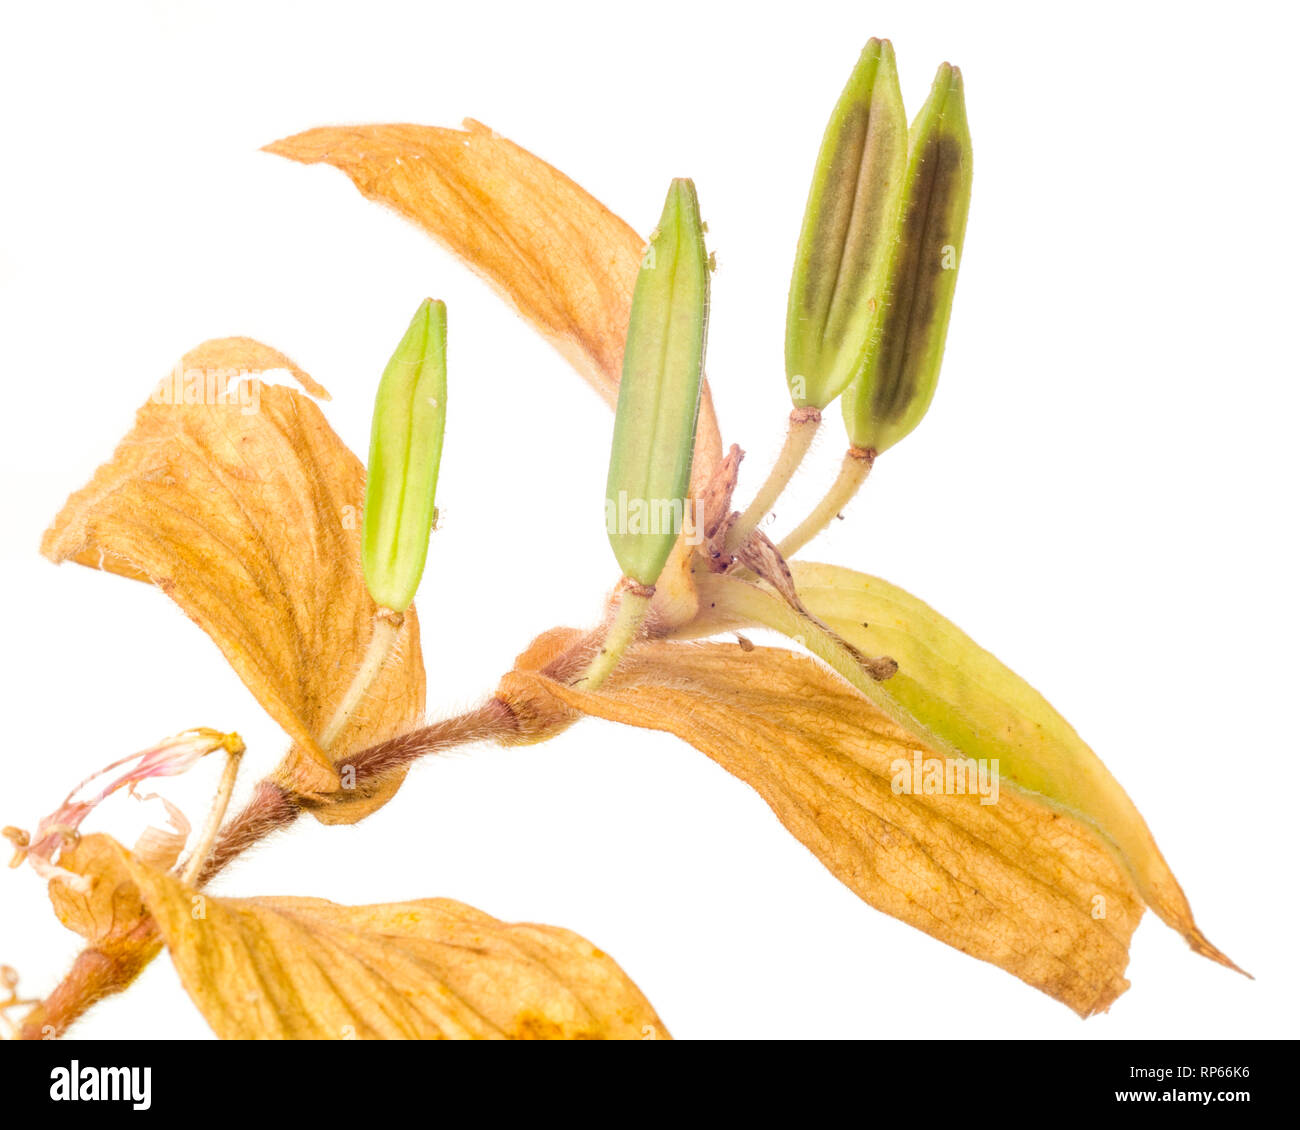 Toad Lily, Tricyrtis hirta, with Multiple Seed Pods against White Background Stock Photo